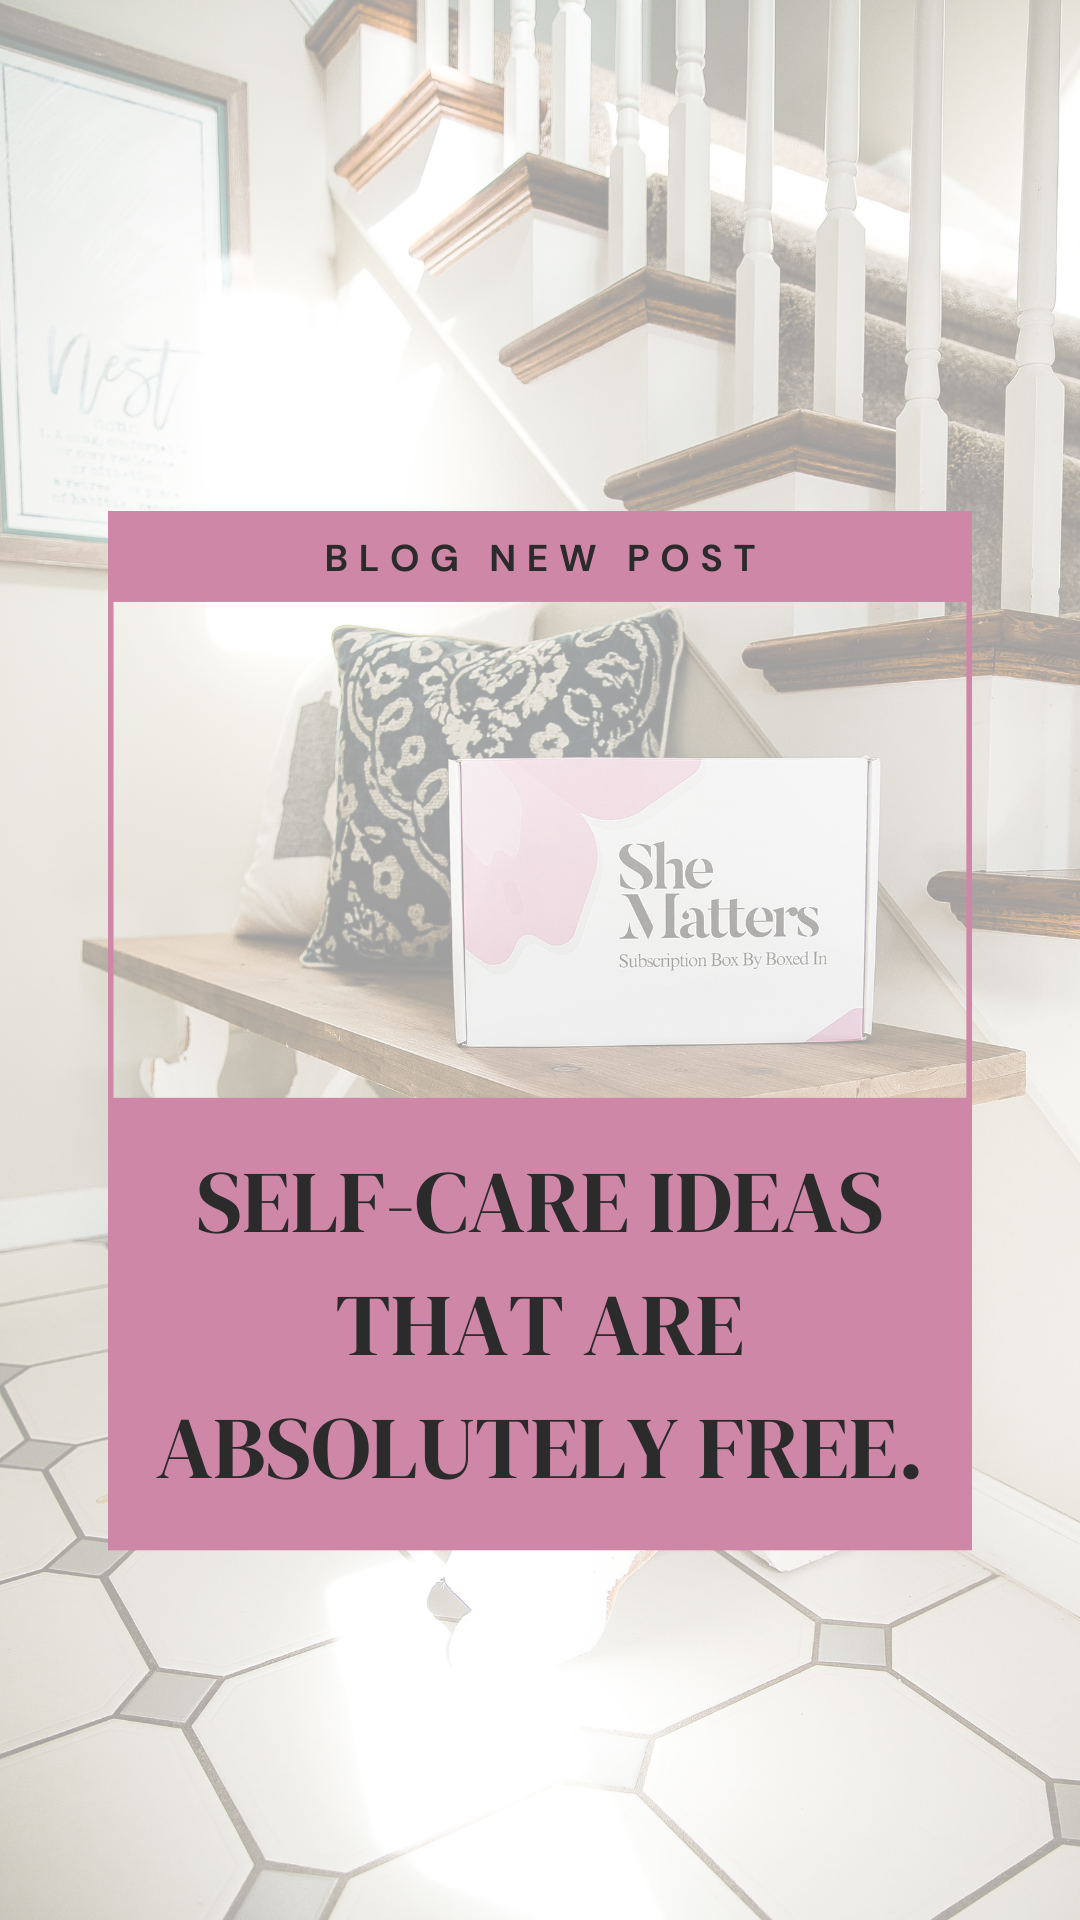 Self-Care Ideas That Are FREE